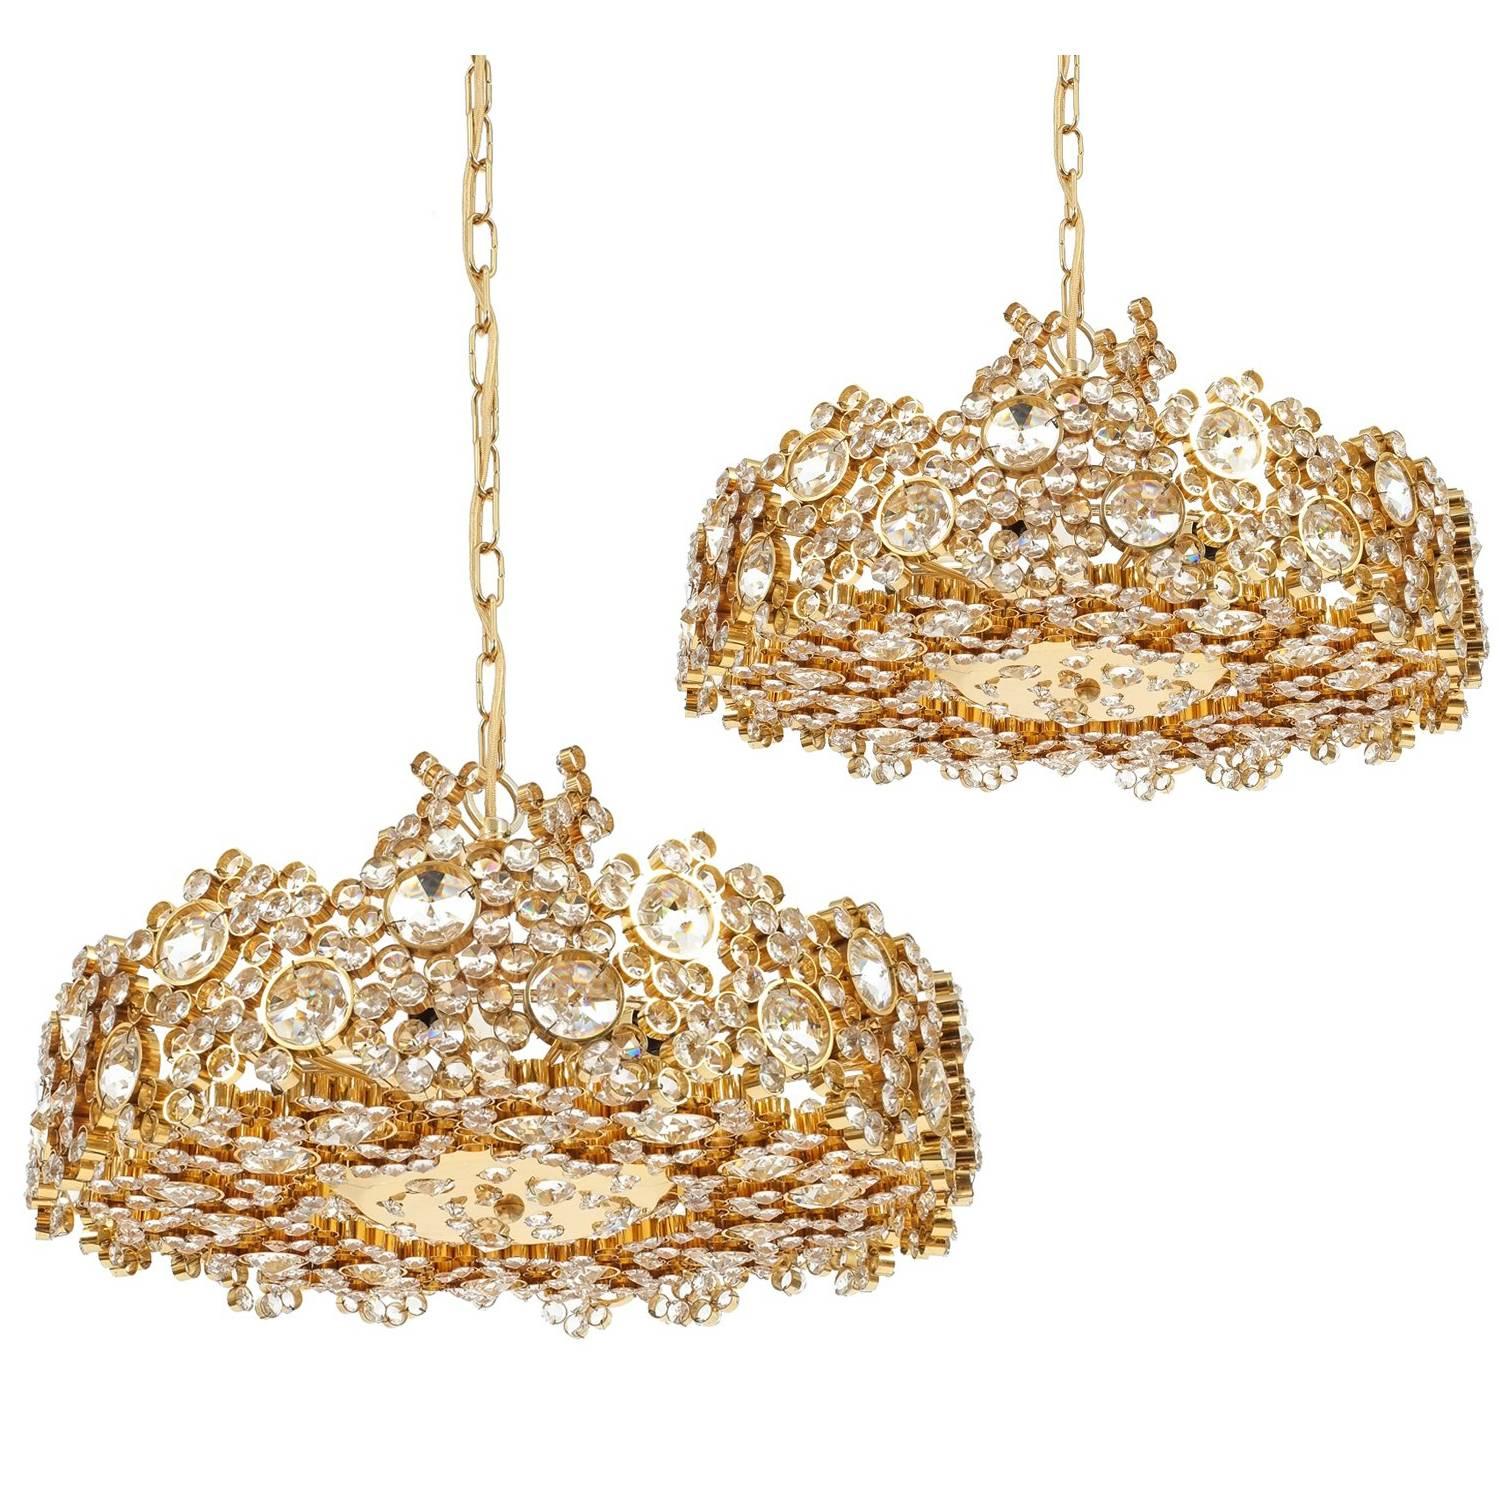 One of Two Palwa Crystal Glass Brass Chandeliers Refurbished Lamps, 1960